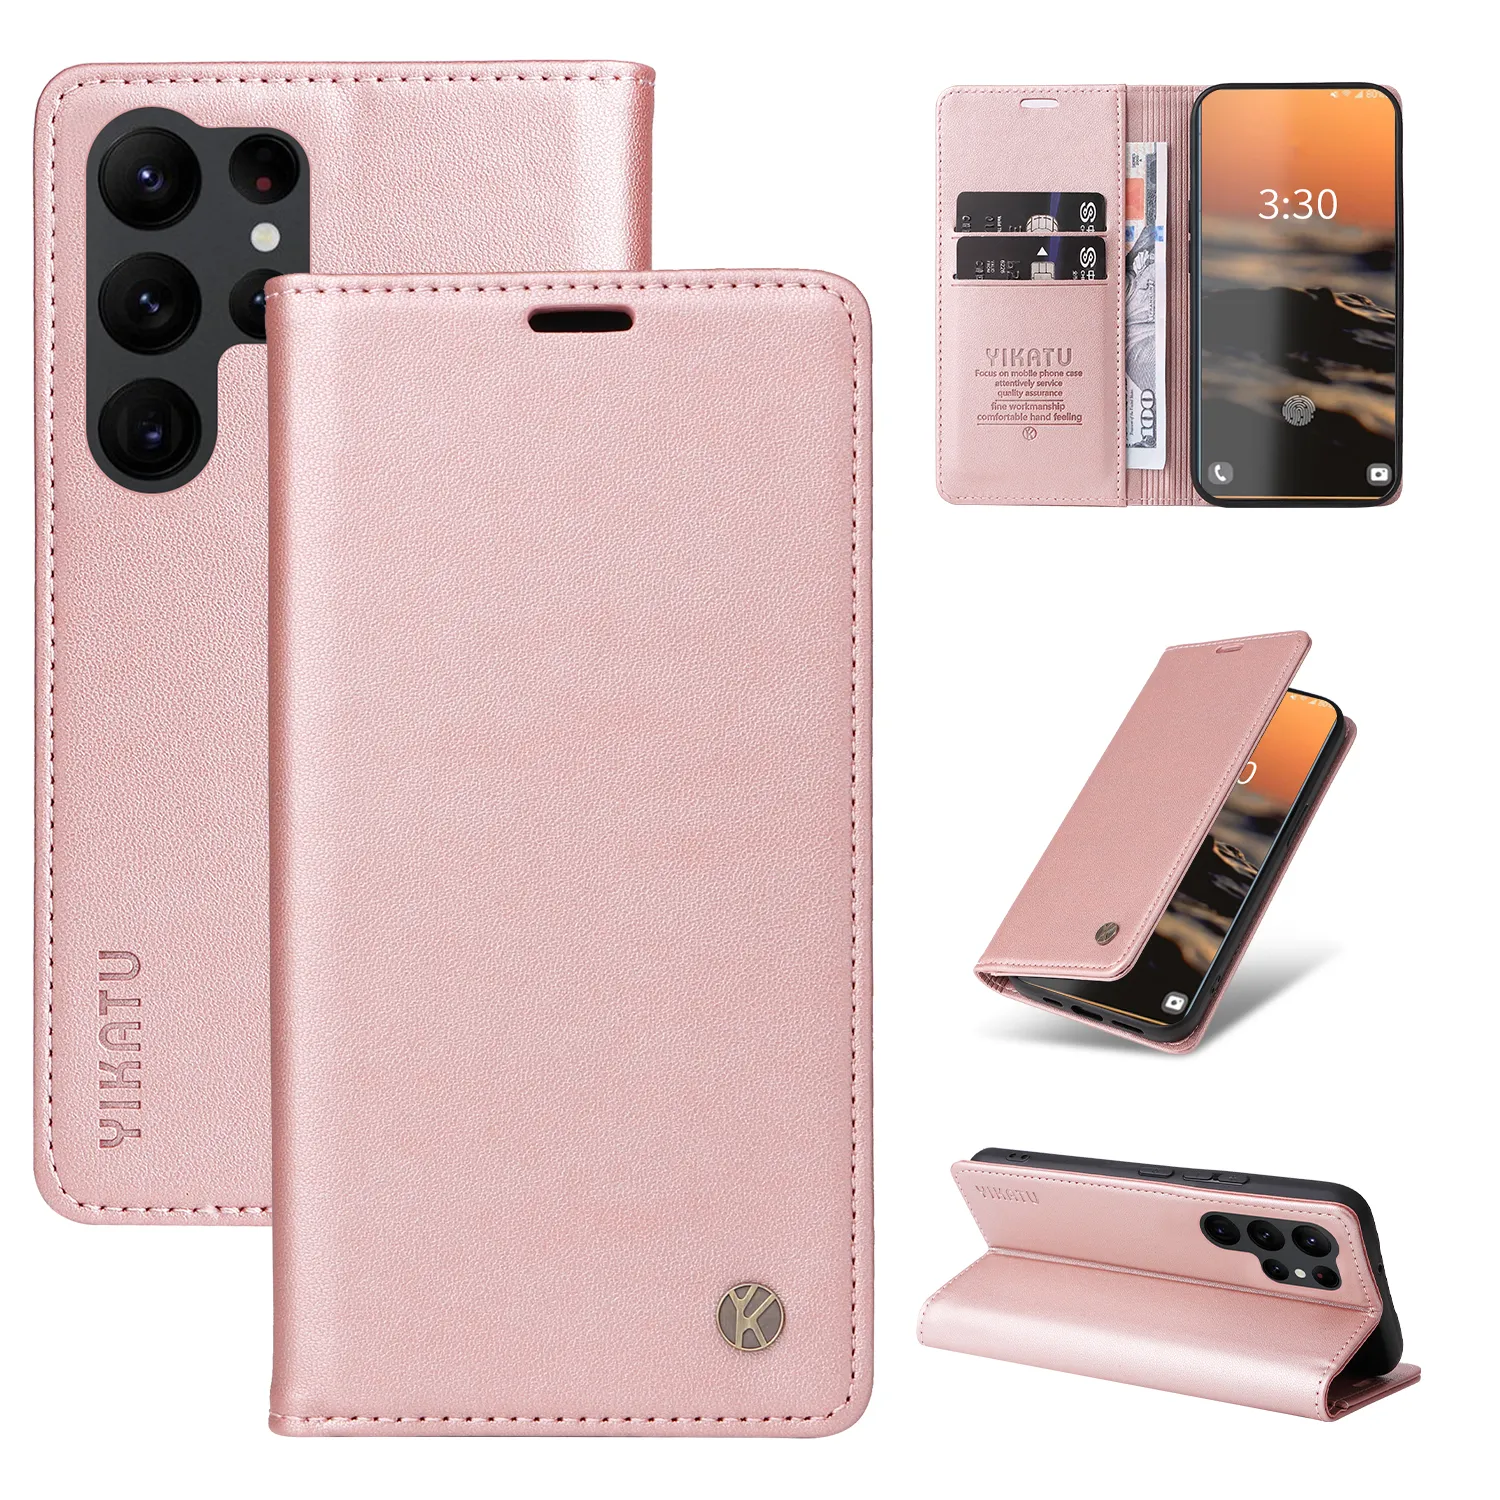 PU Leather Matte Flip Stand Wallet Cases for Samsung Galaxy S23 Ultra S22 Plus S21 S20 Note 20 Shockproof 2 Card Slots Holder Phone Cover